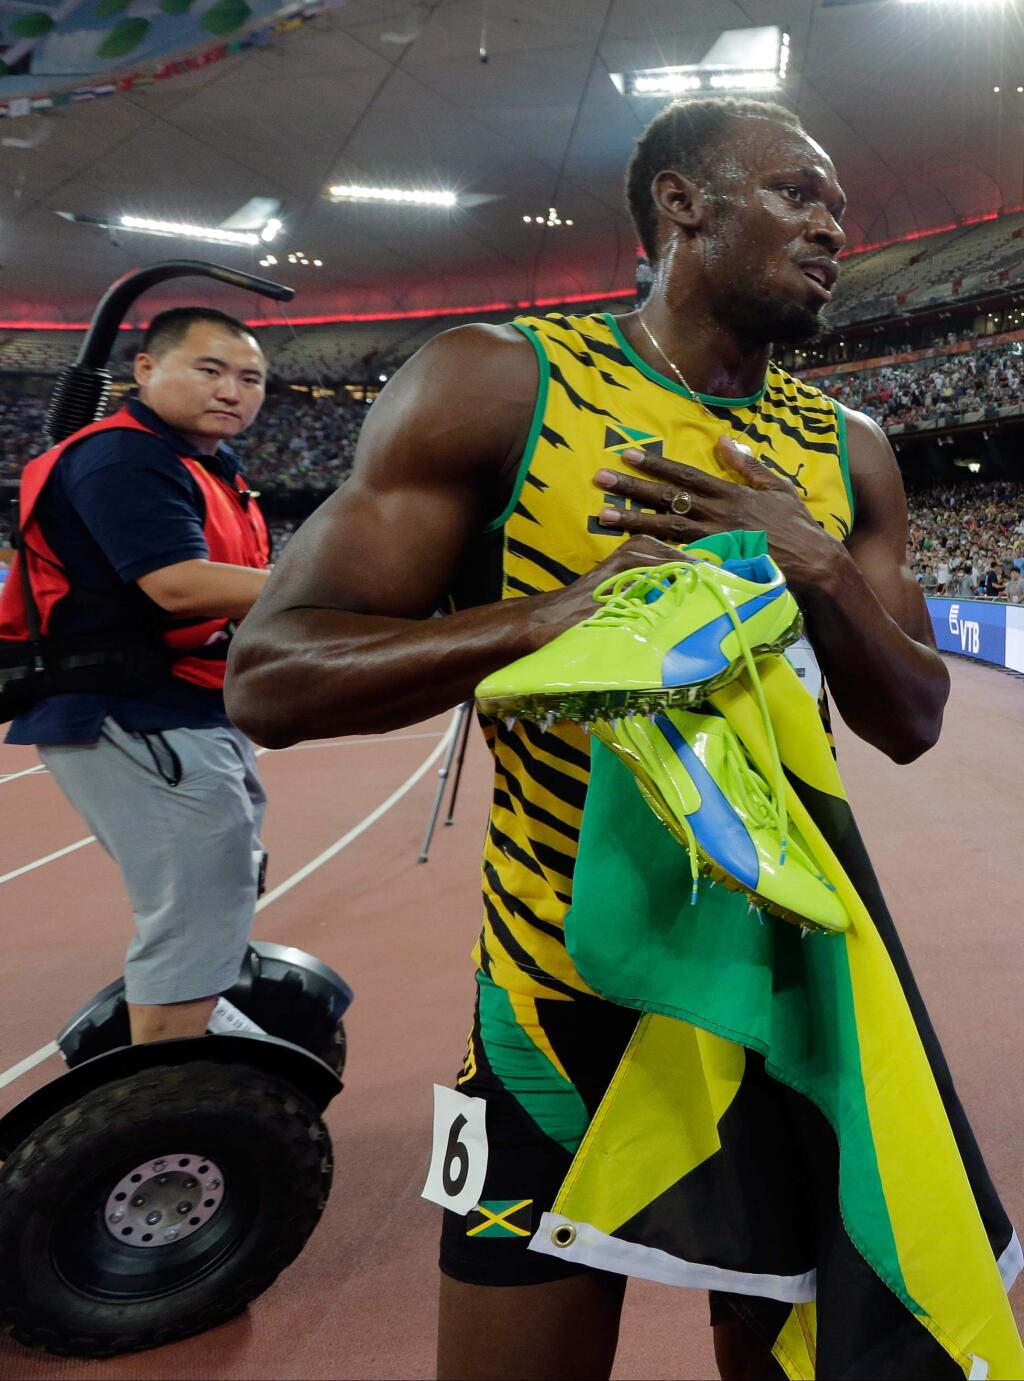 Jamaica's Usain Bolt celebrates after winning the gold in the men's 200m final at the World Athletics Championships at the Bird's Nest stadium in Beijing, Thursday, Aug. 27, 2015. (AP Photo/Andy Wong)